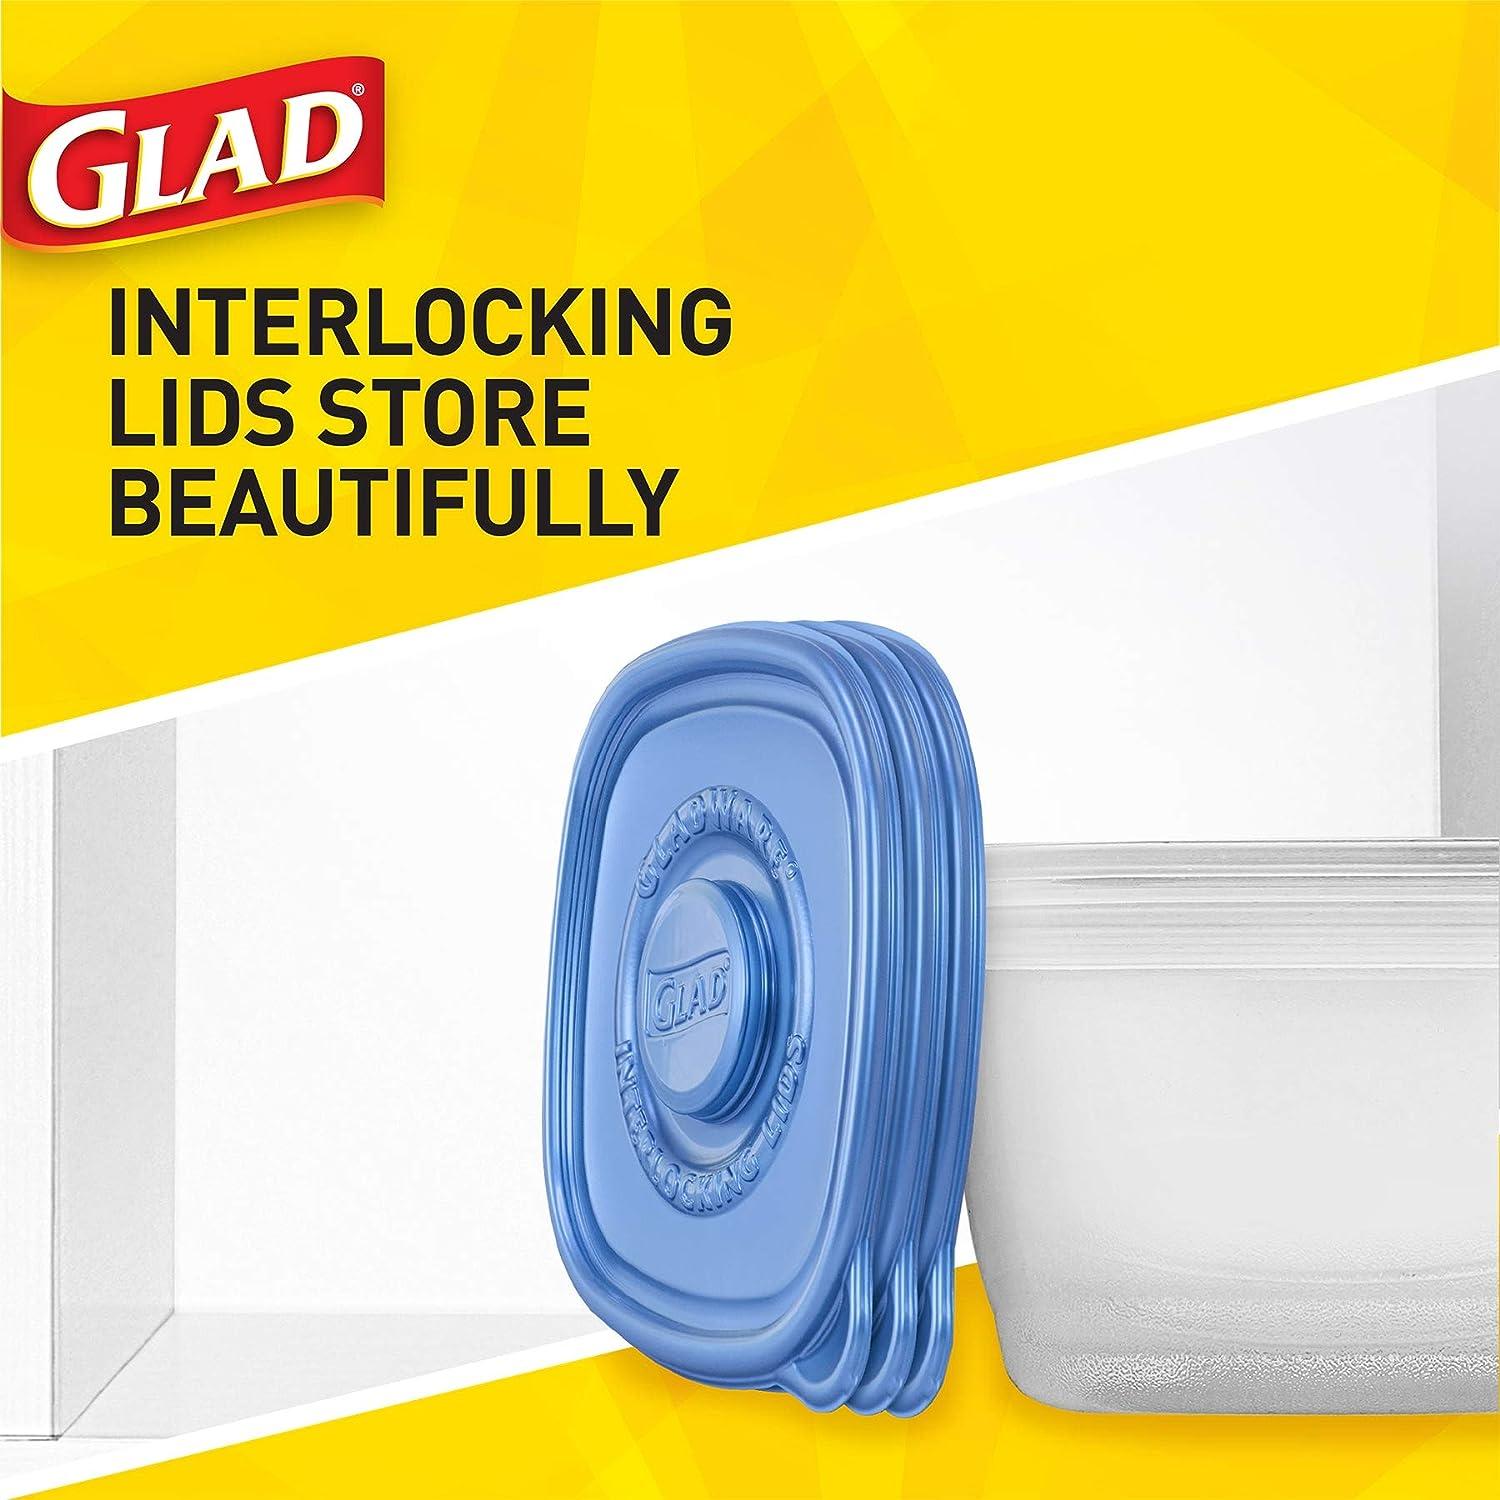 Glad gladware medium entre square food storage containers with lids